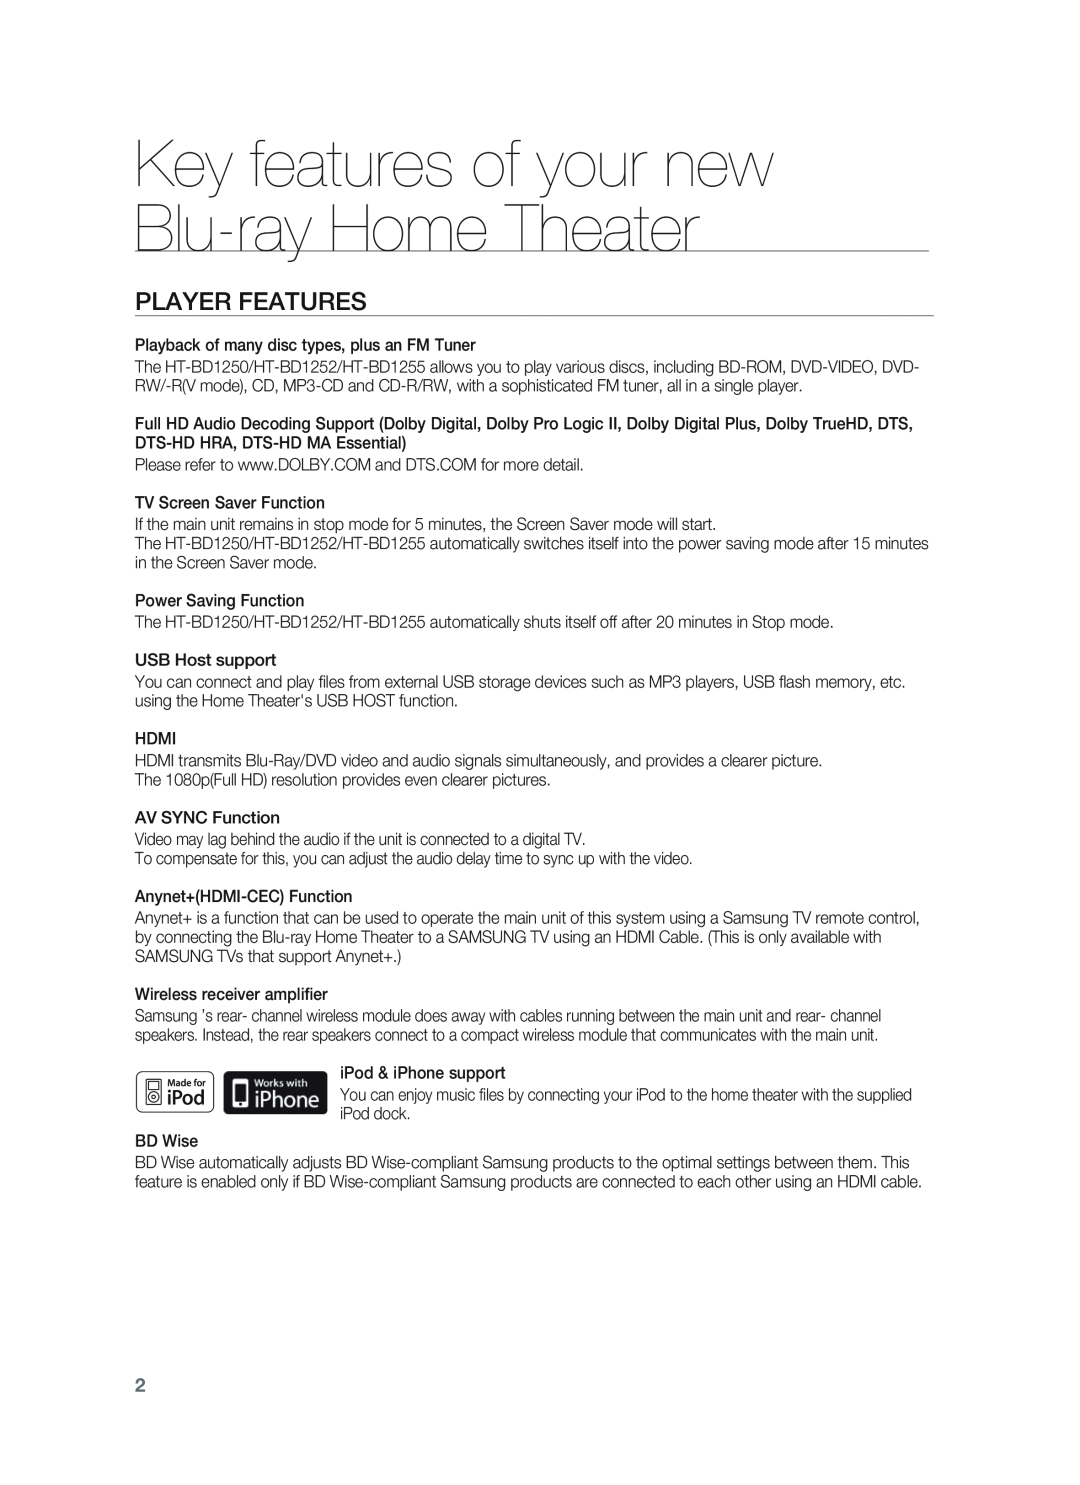 Samsung HT-BD1255, HT-BD1252 user manual Key features of your new Blu-rayHome Theater, Player Features 